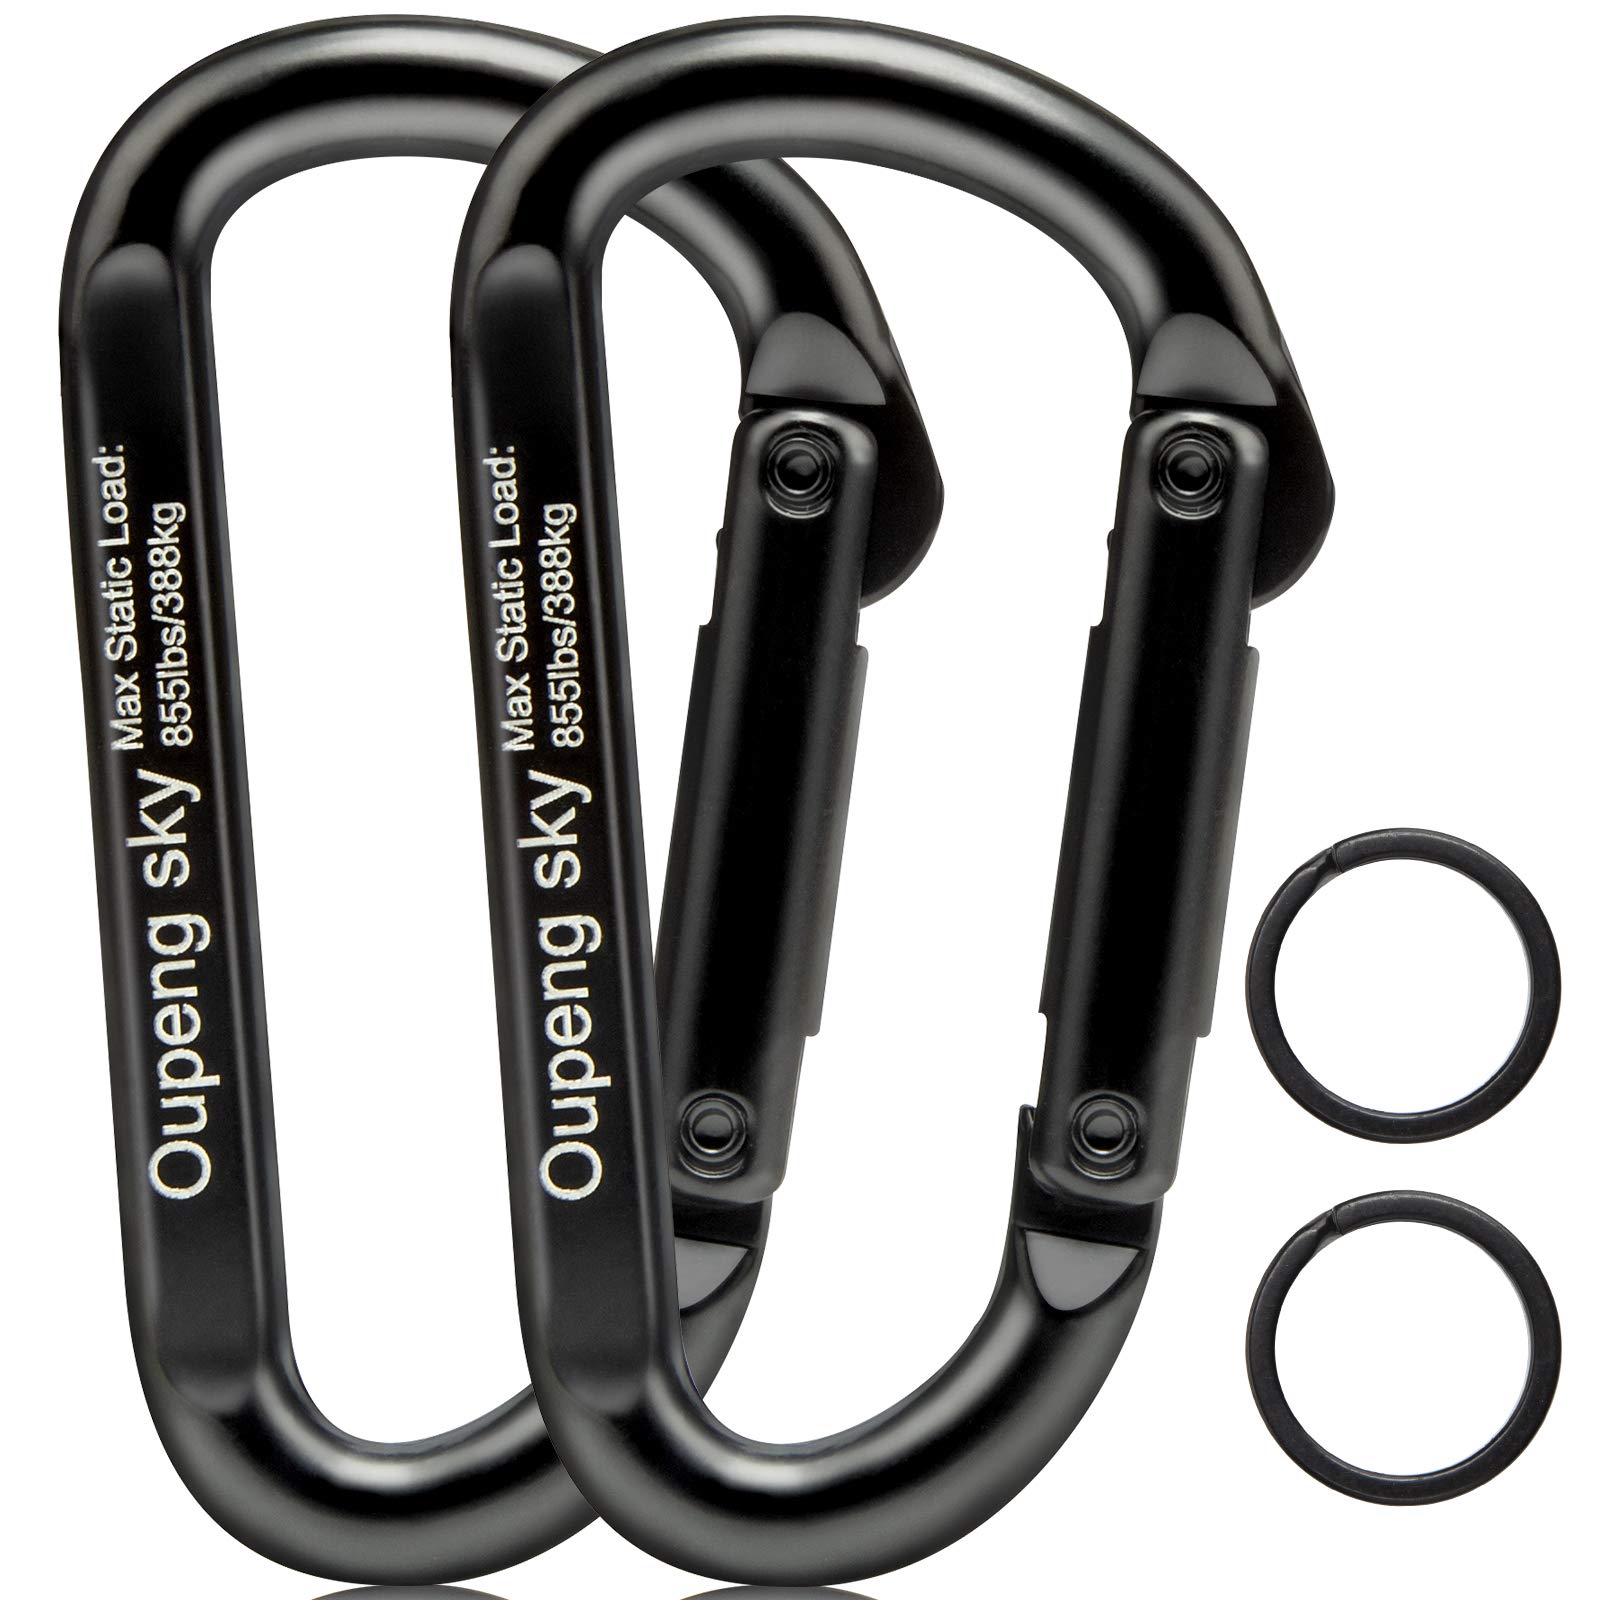 Carabiner Spring Clips Mini Hook for Clamping Outdoor Camping